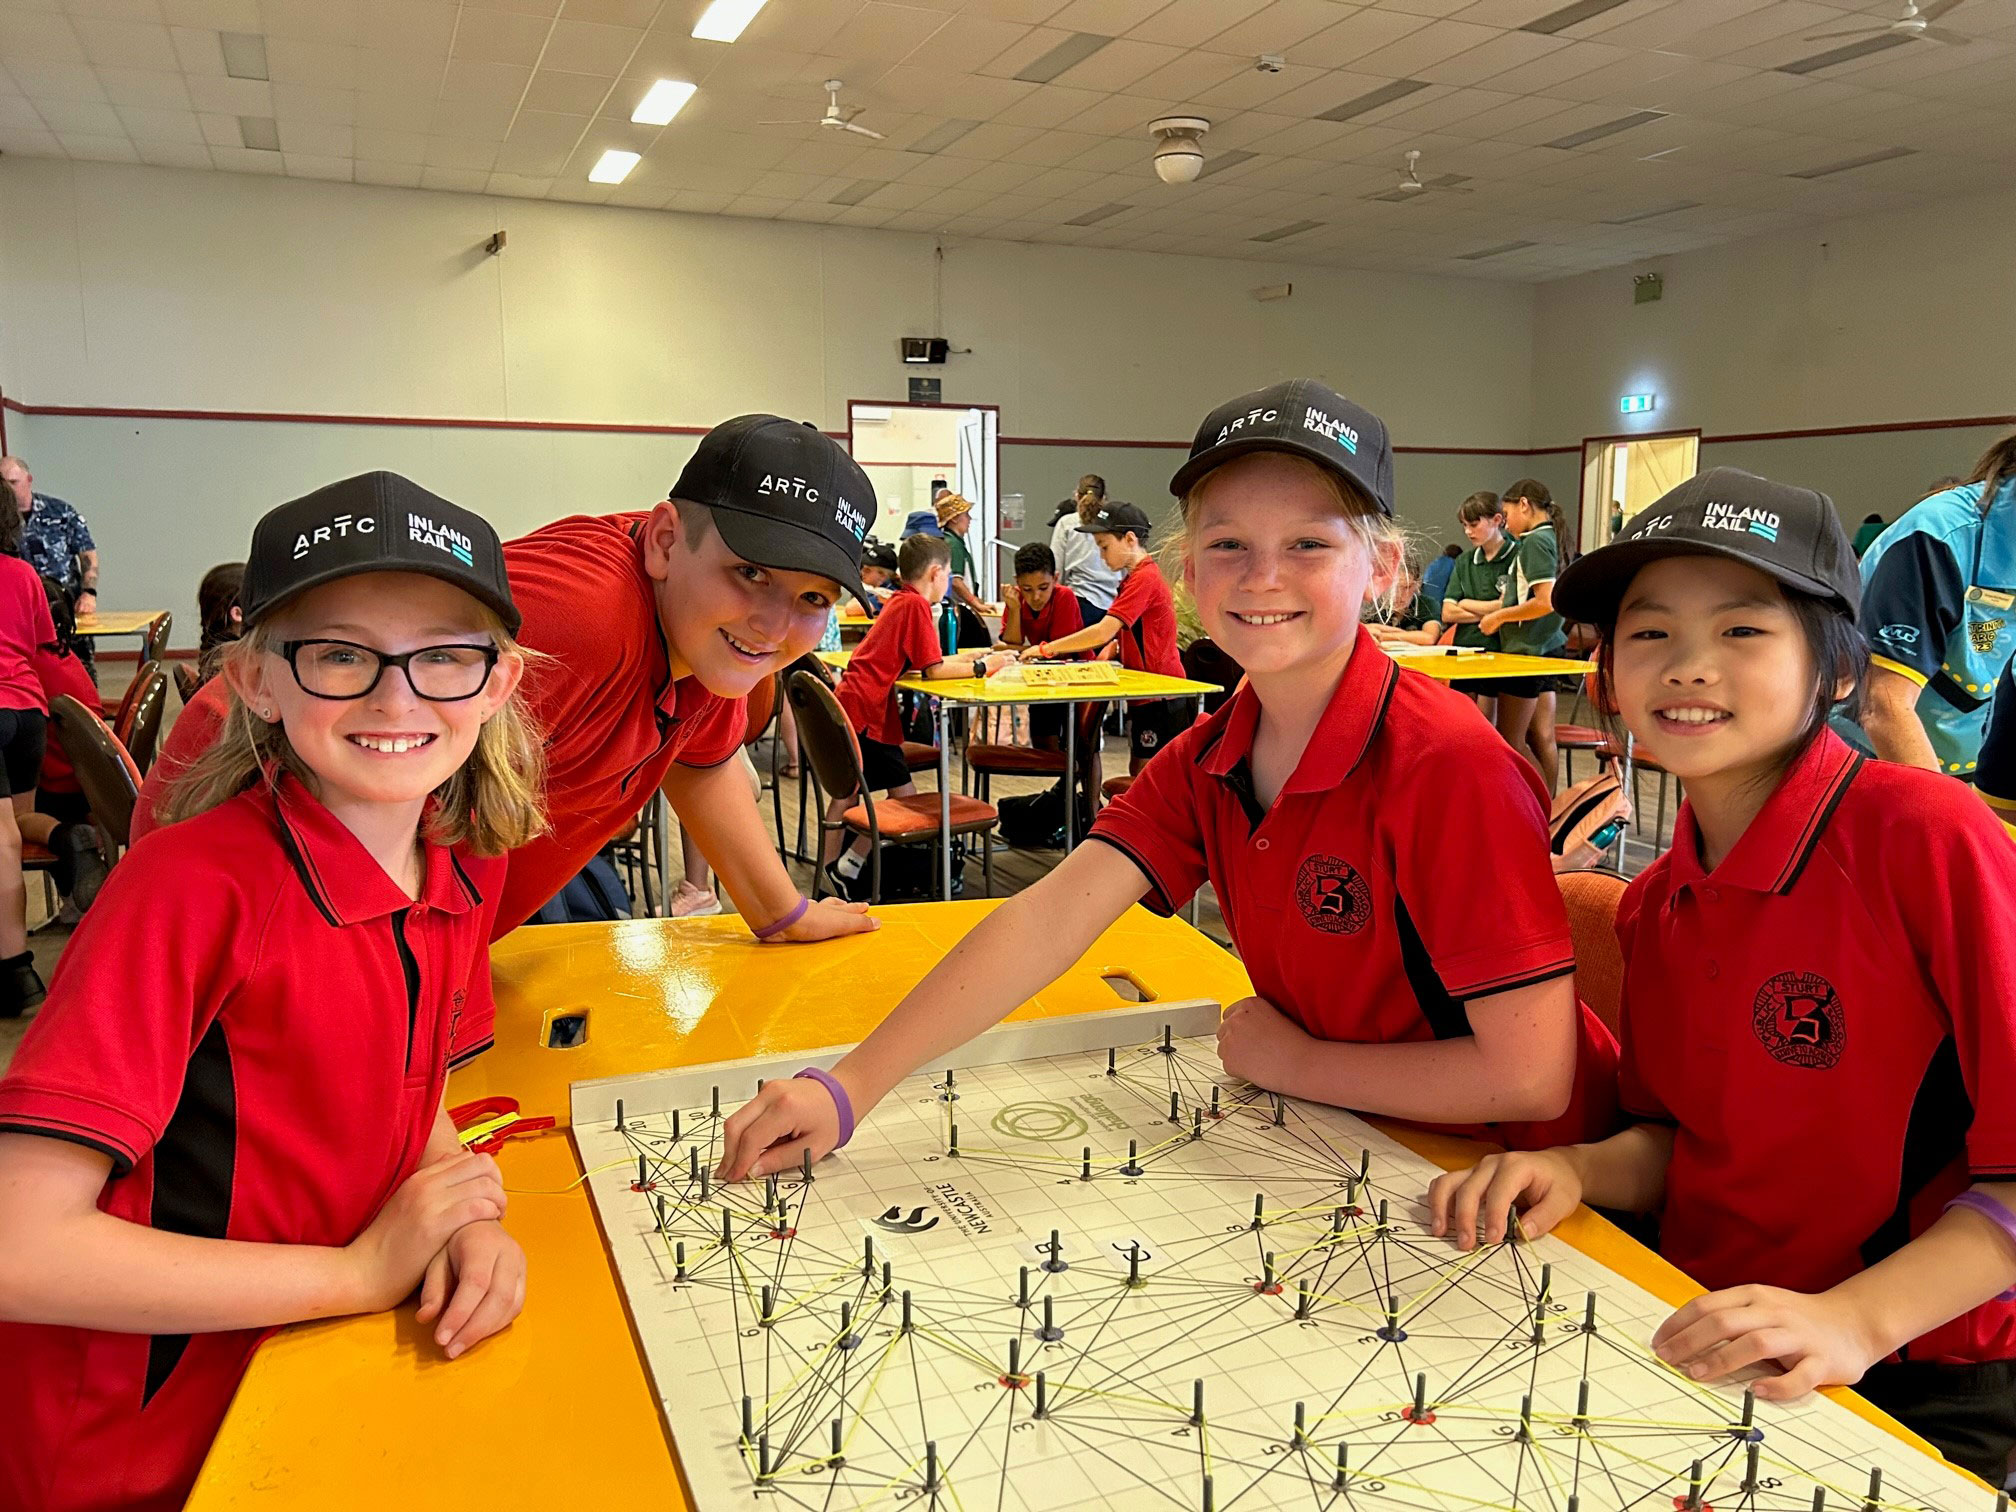 Students from Sturt Public School take part in the Science and Engineering Challenge